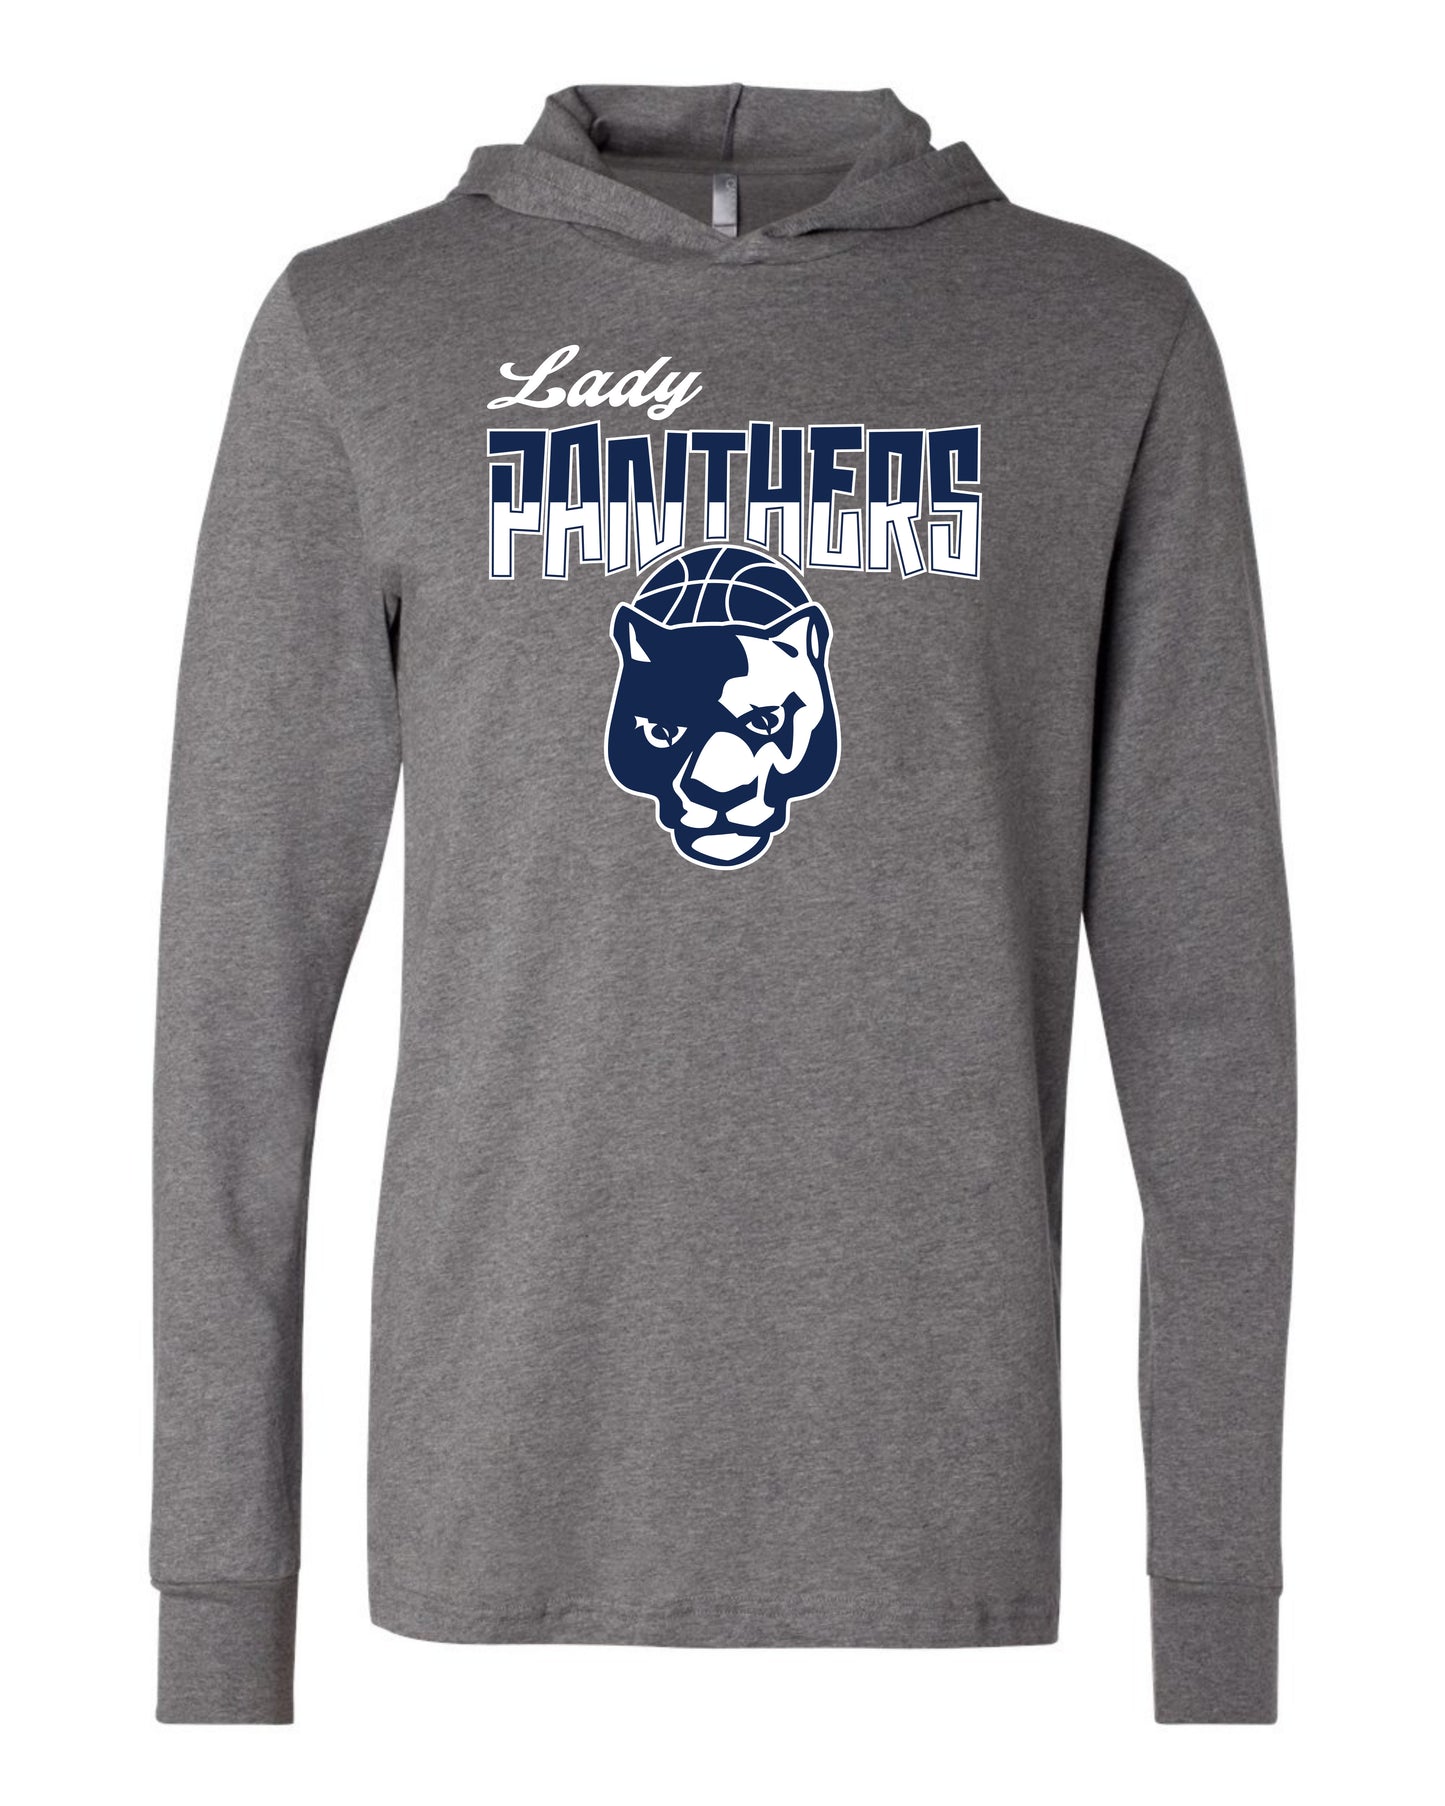 Lady Panthers Two-Tone - Adult Hooded Long Sleeve